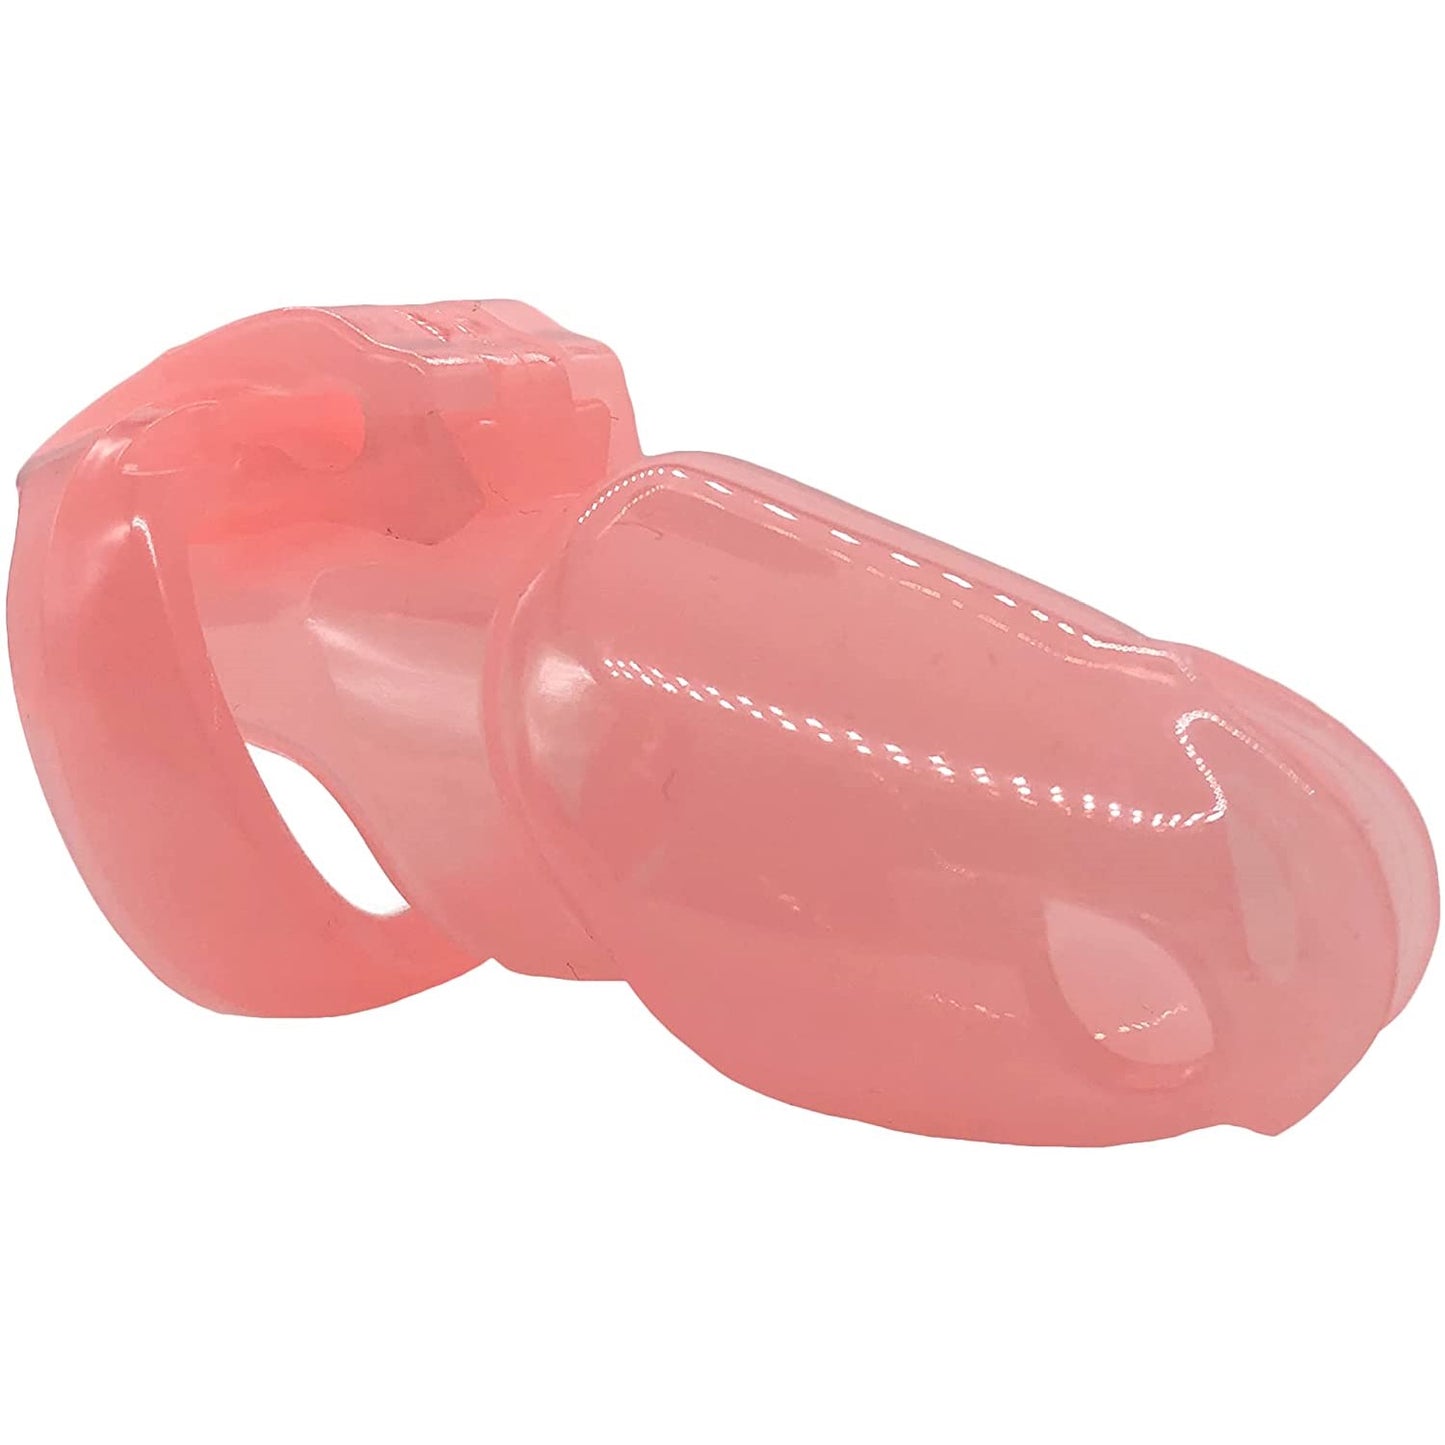 HT-V4 Chastity Device Locked Cage Male Cock Cage Sex Toy 5 Rings